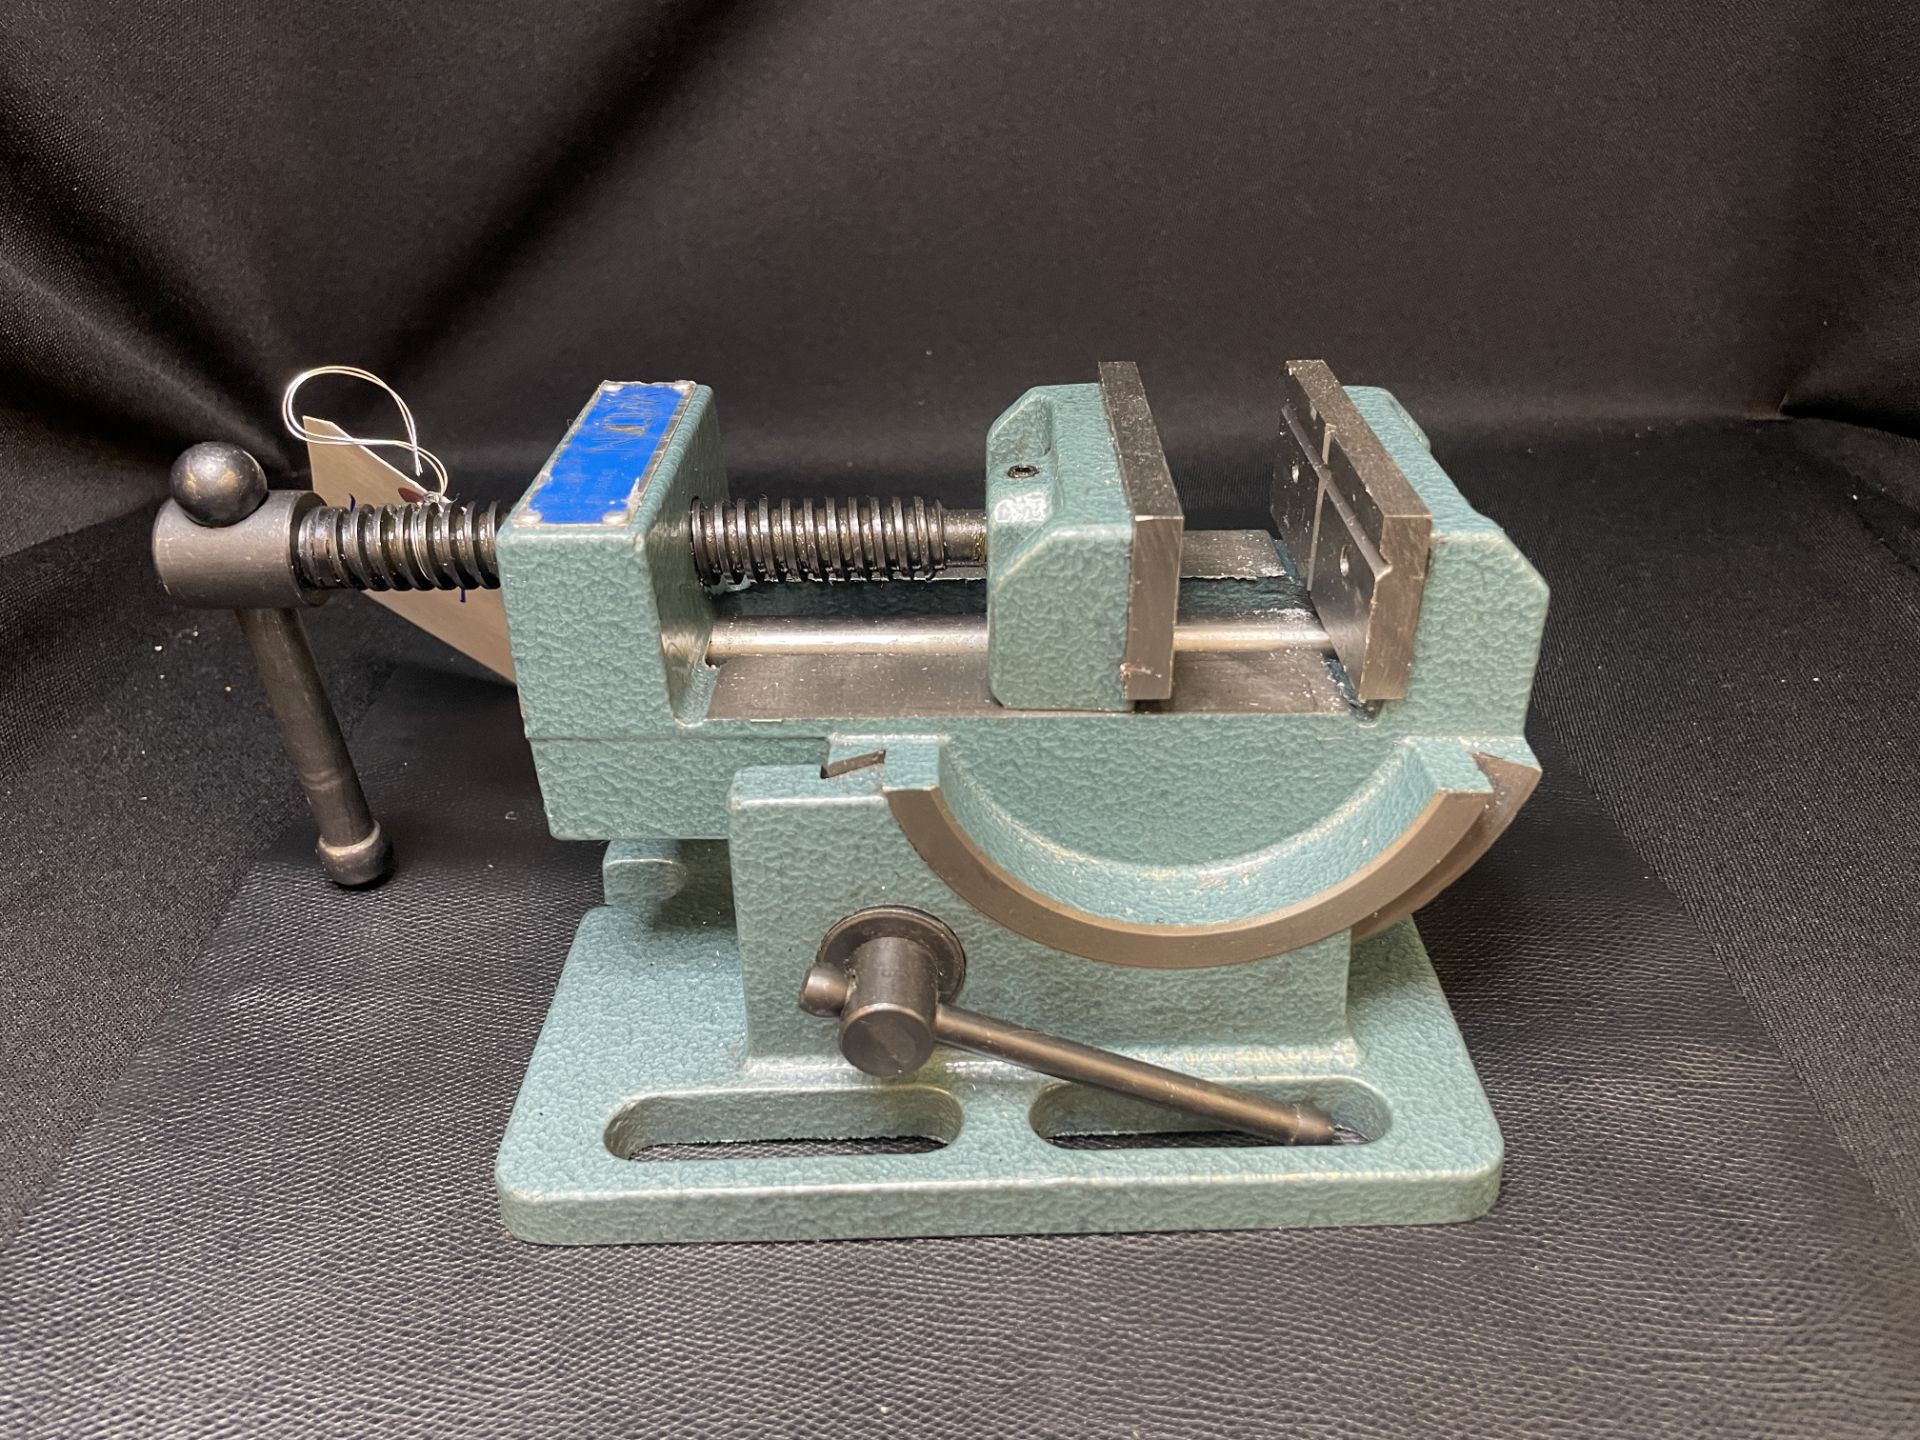 Wilton Slide Bed Vice w/3 1/4" Jaws - Image 3 of 3